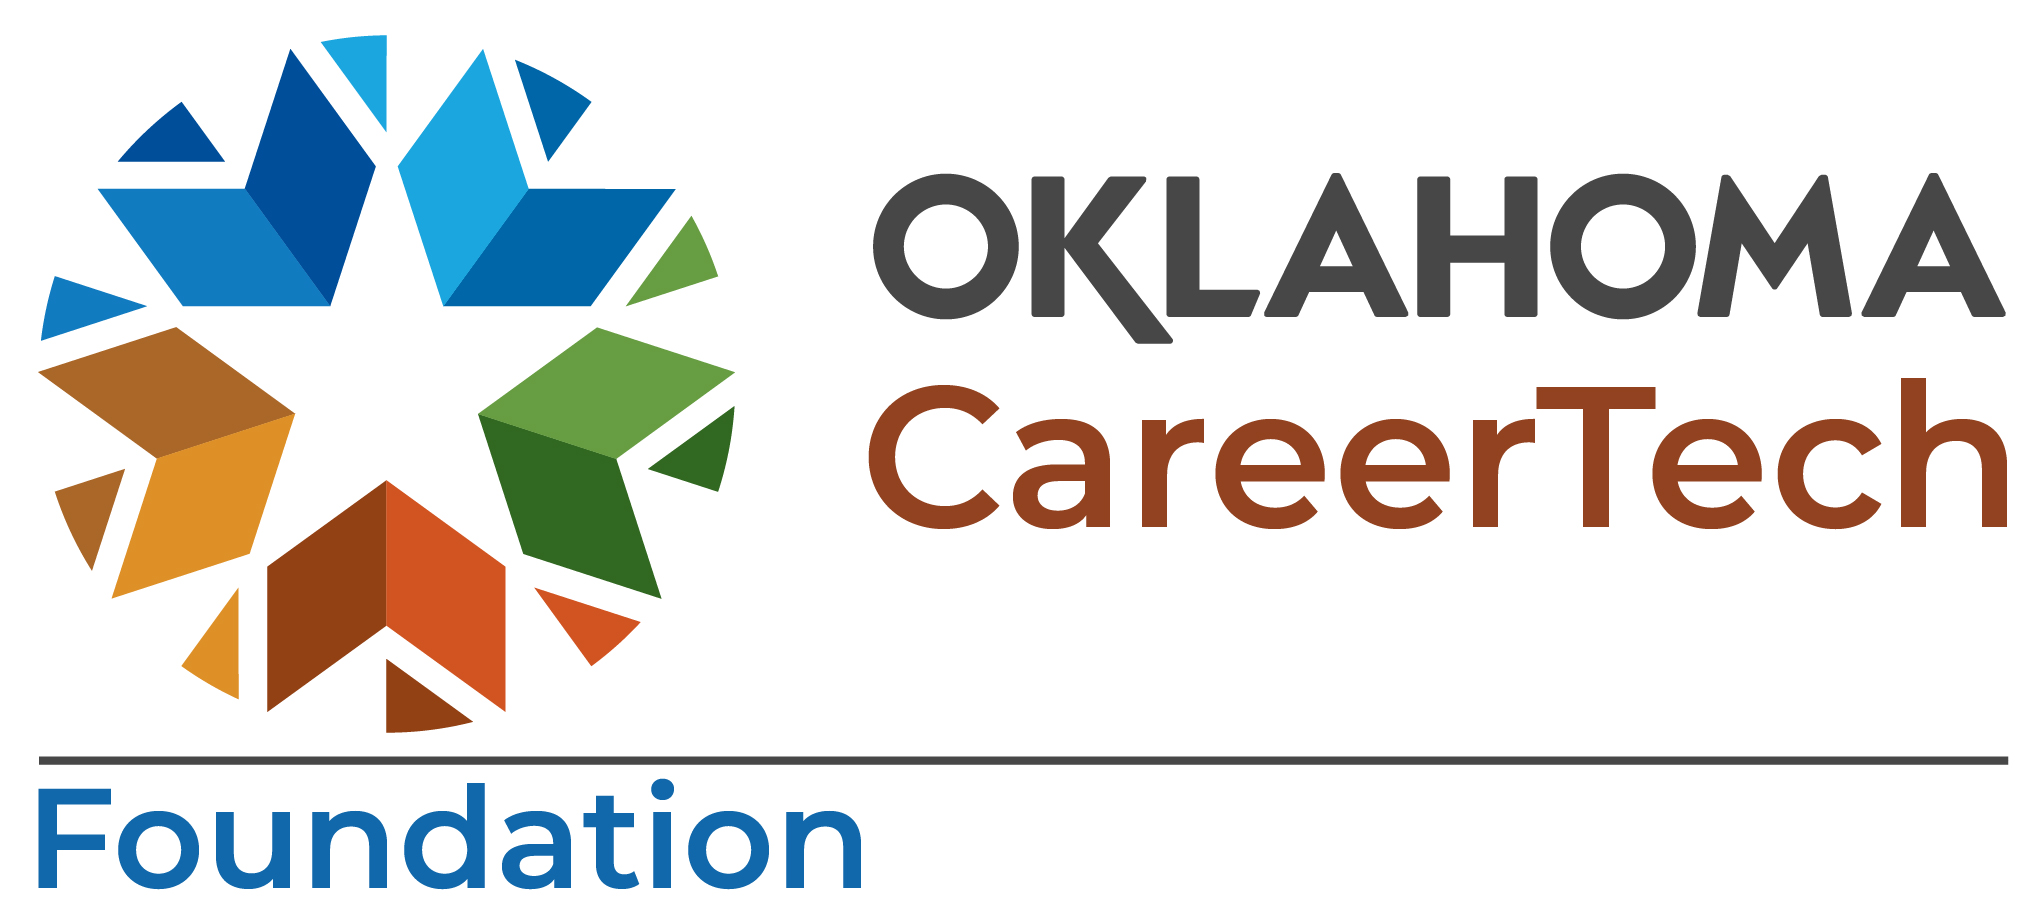 The official seal of the Oklahoma CareerTech Foundation.